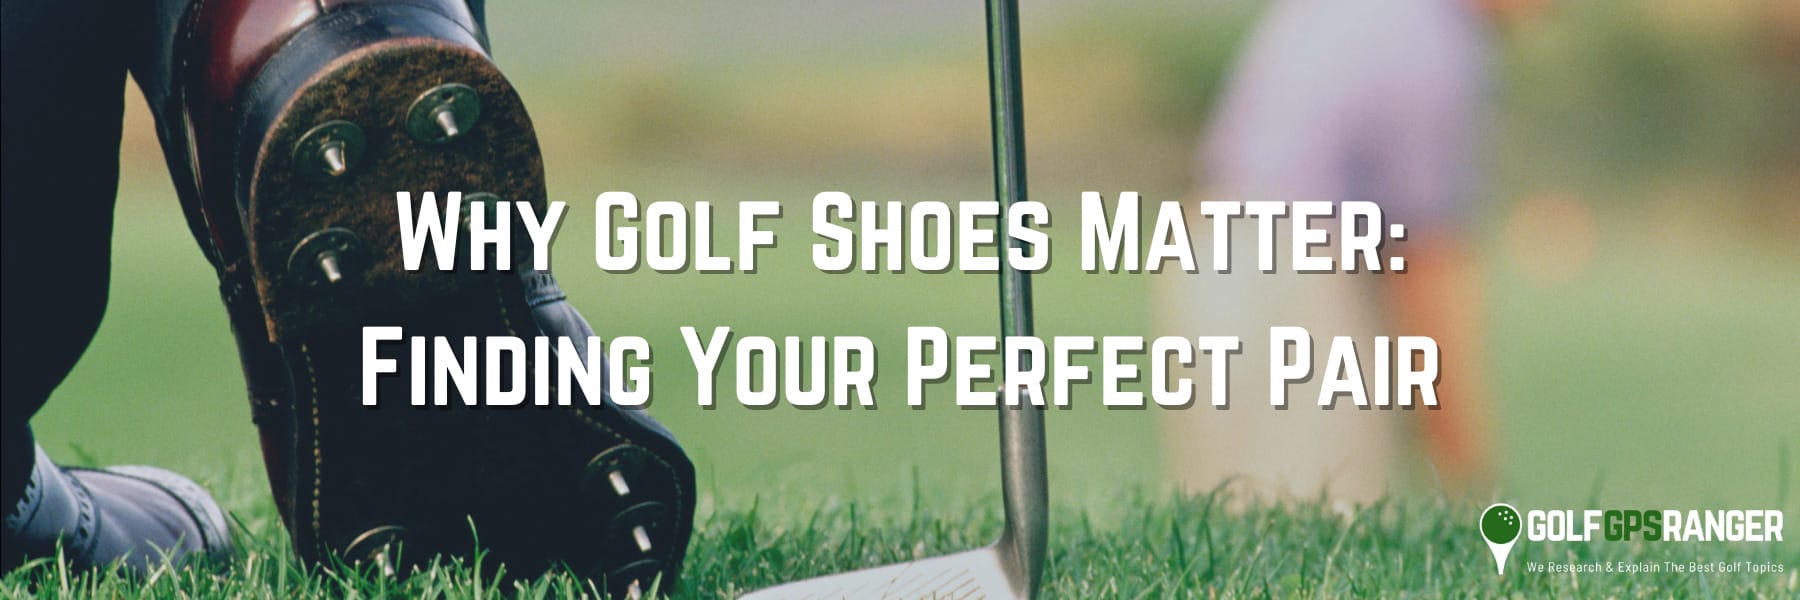 Why Golf Shoes Matter Finding Your Perfect Pair